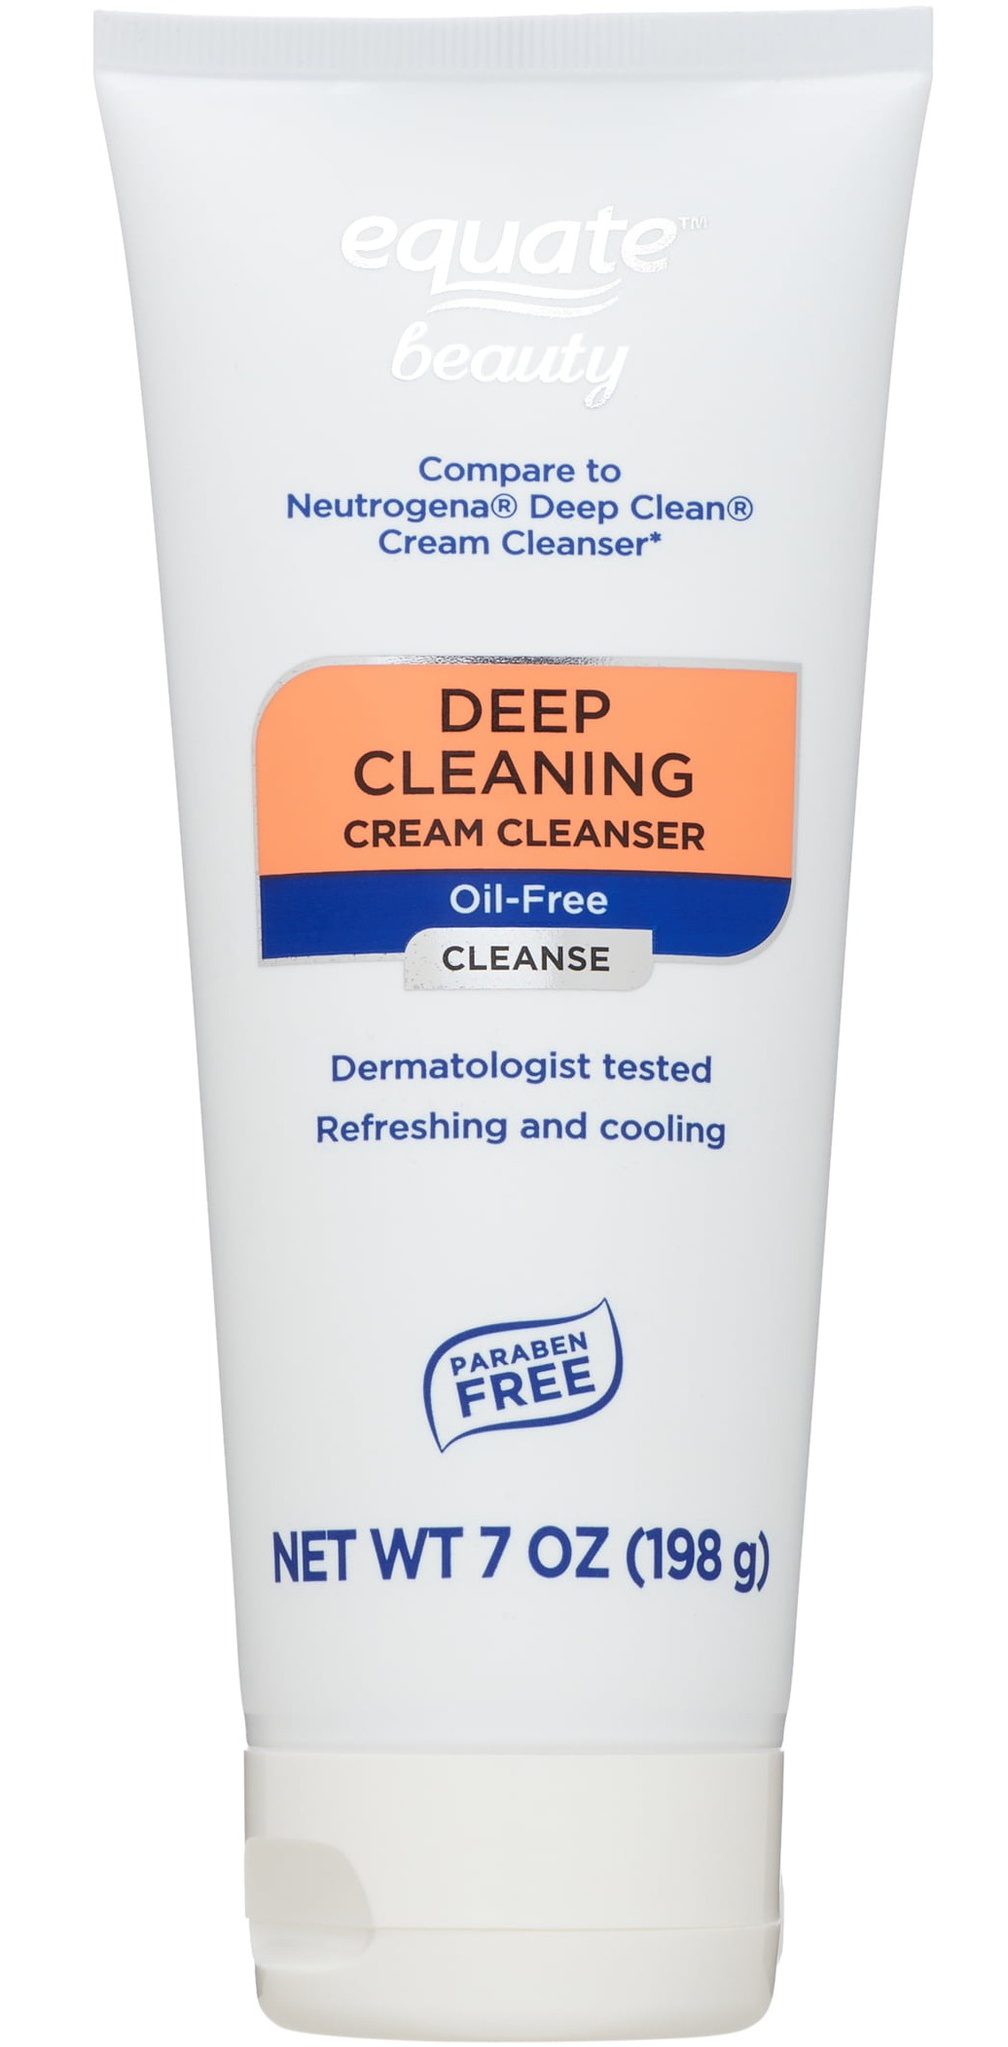 Equate Beauty Deep Cleaning Cream Cleanser Oil-free Cleanse